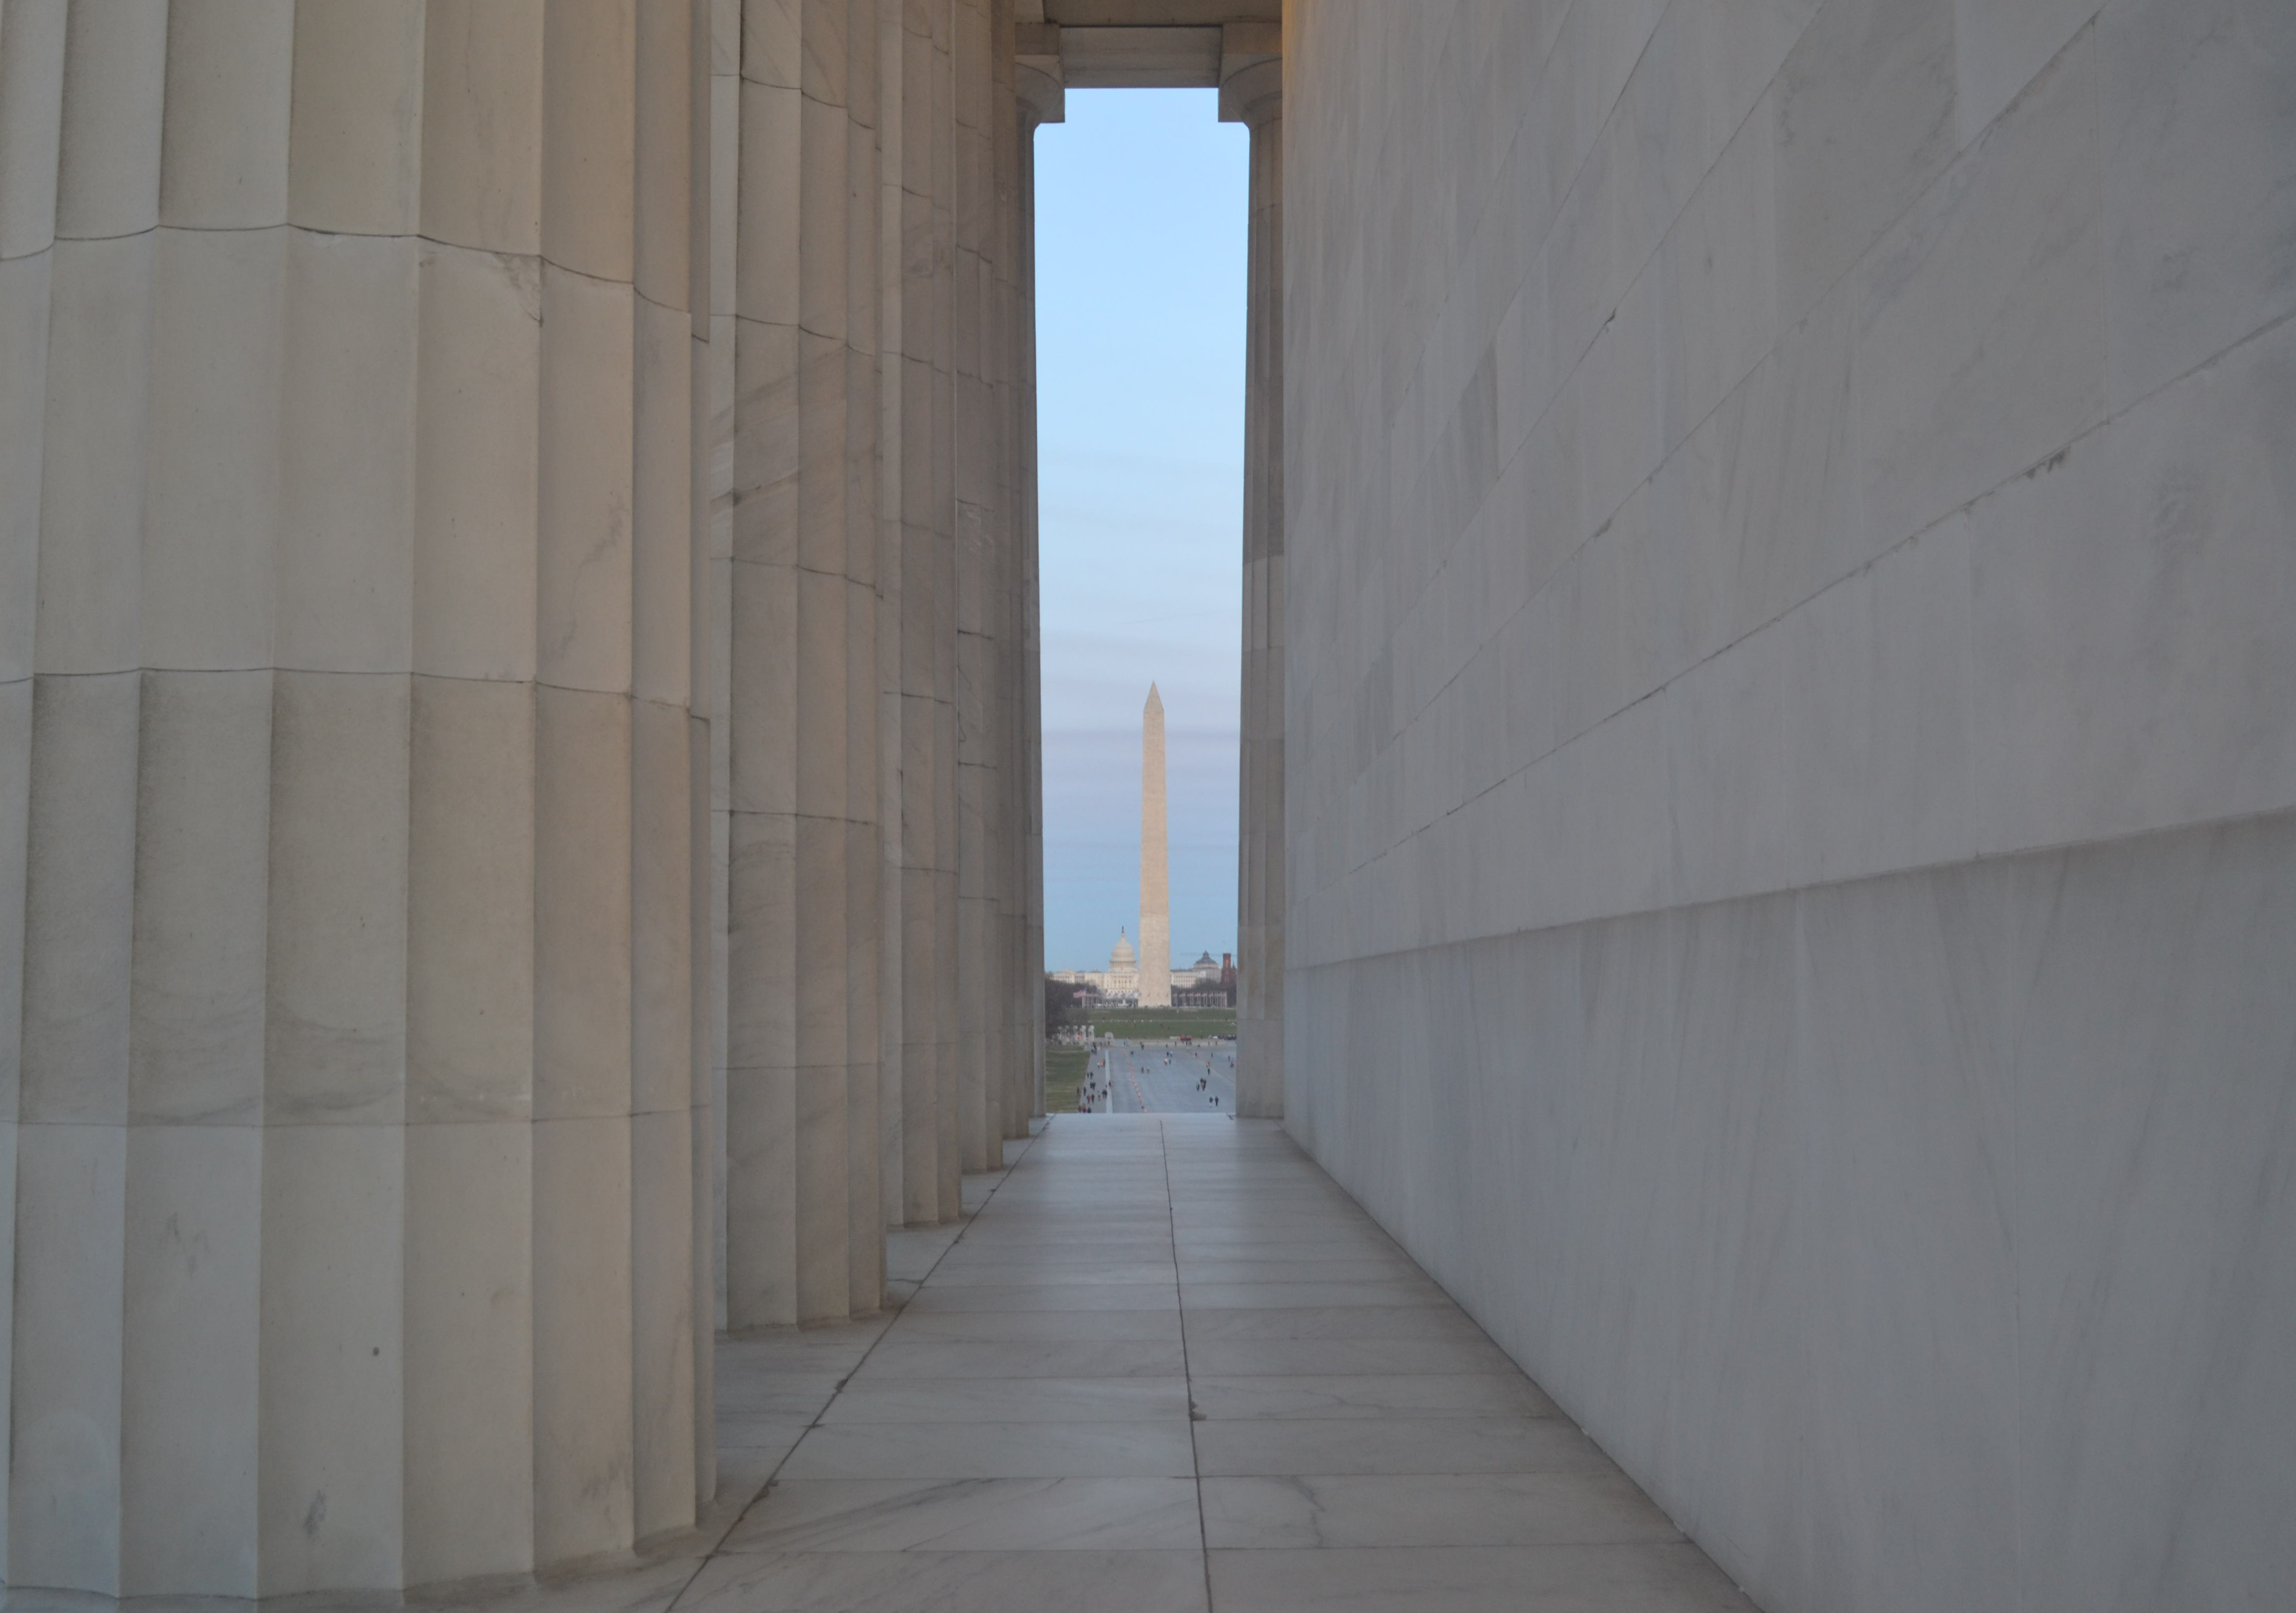 Ridged marble columns on the left, a flat marble wall on the right, and a polished marble floor, frame a distant obelisk and white dome.